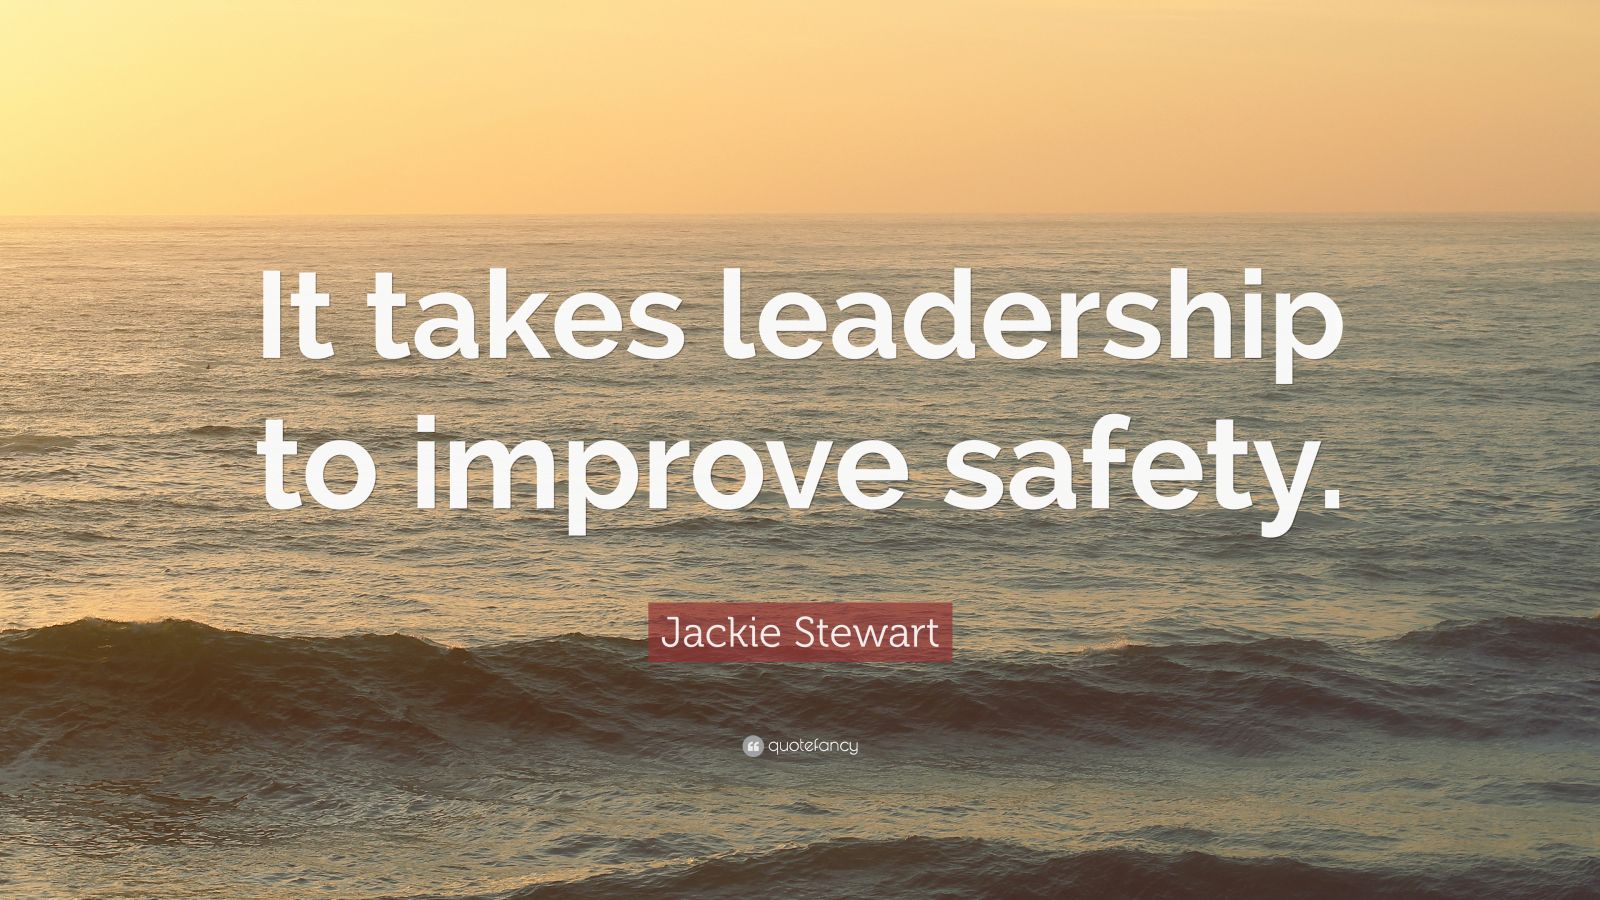 Jackie Stewart Quote: "It takes leadership to improve ...